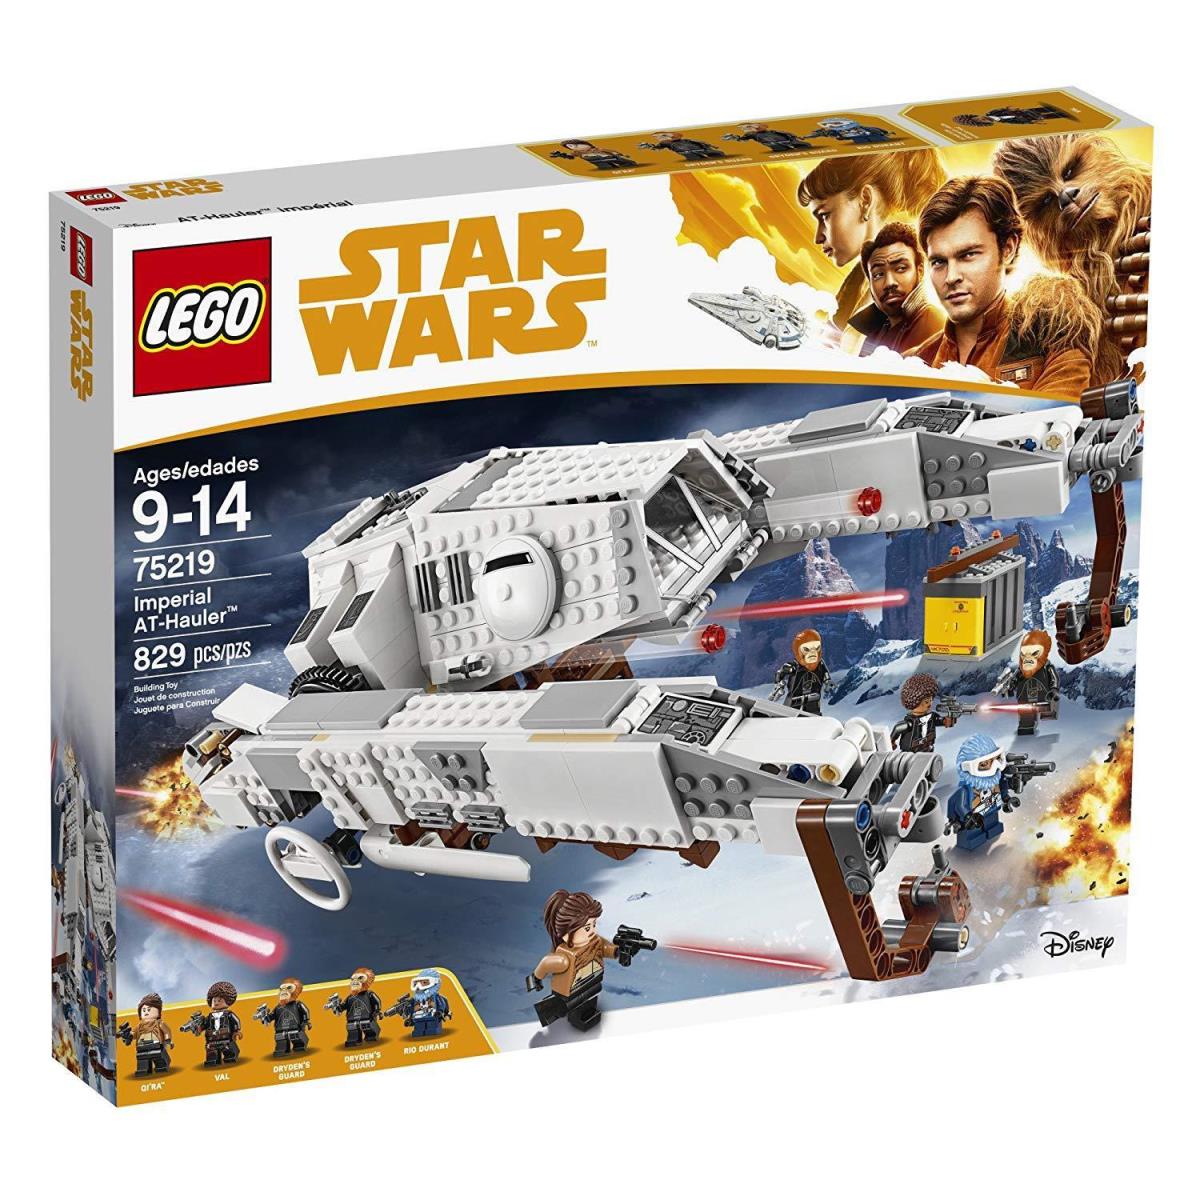 Lego Star Wars Imperial At-hauler 75219 Building Kit 829 Piece